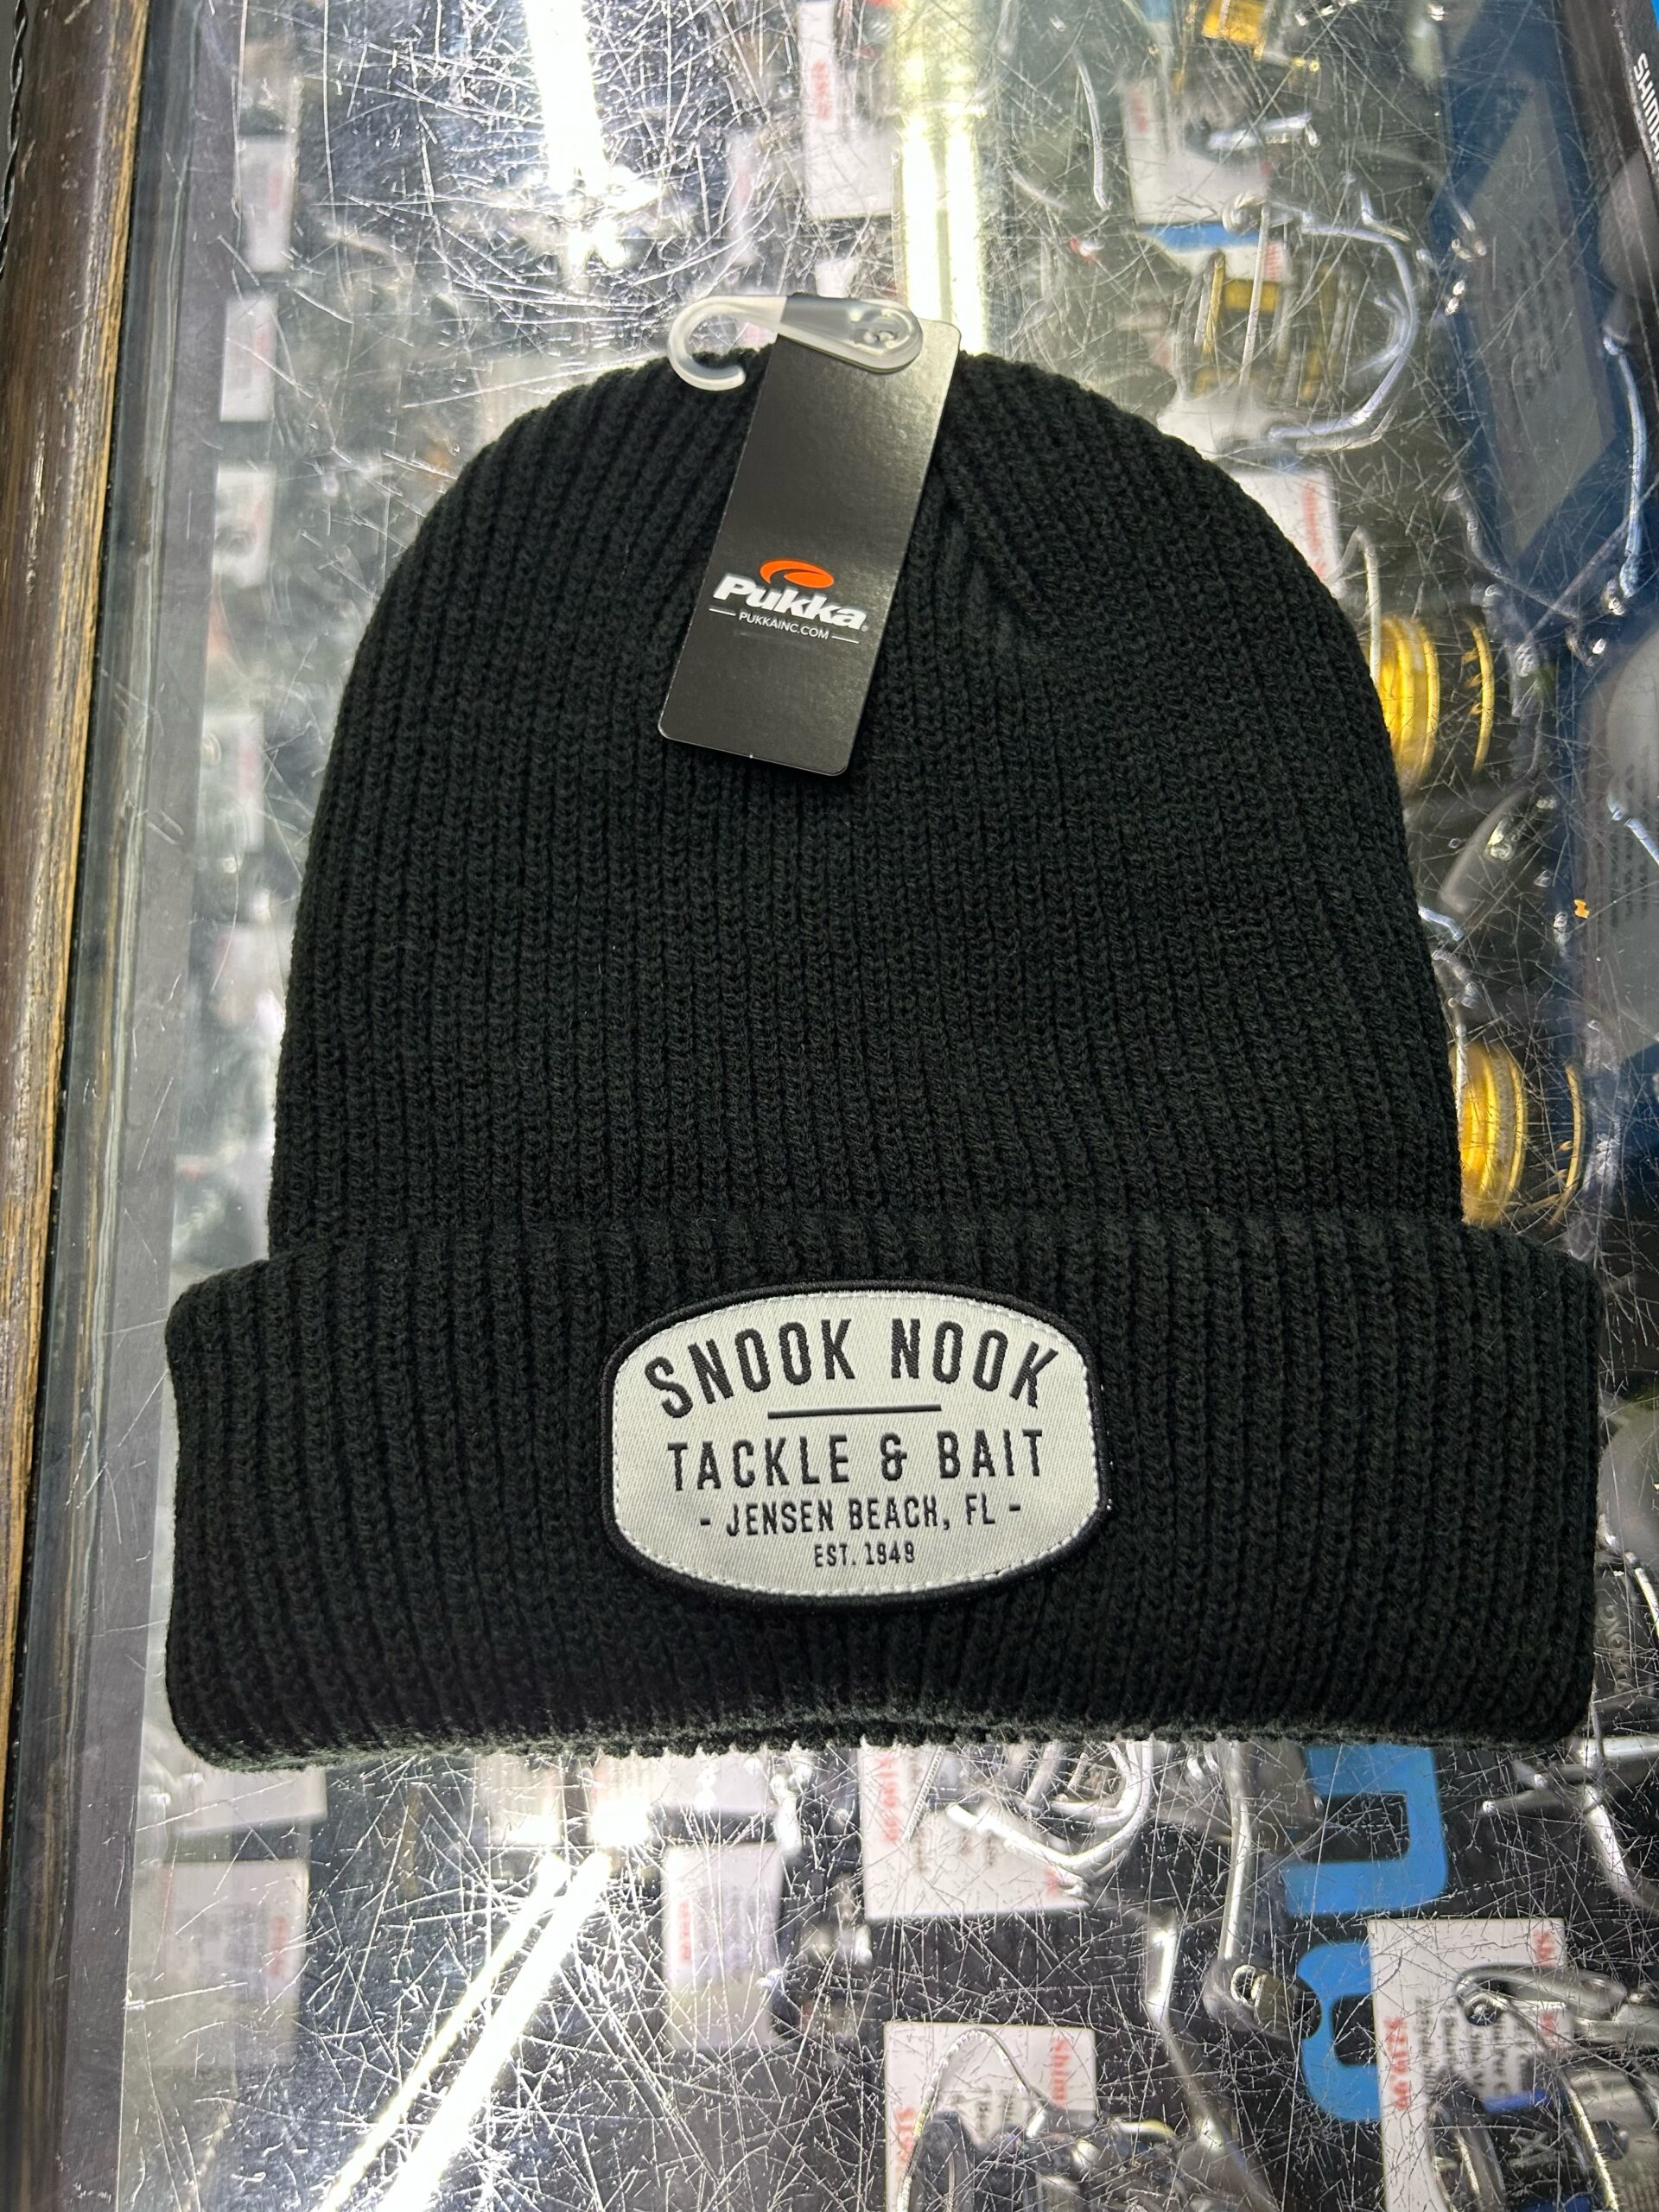 Some new Snook Nook hats just came in! Rumor has it you catch more